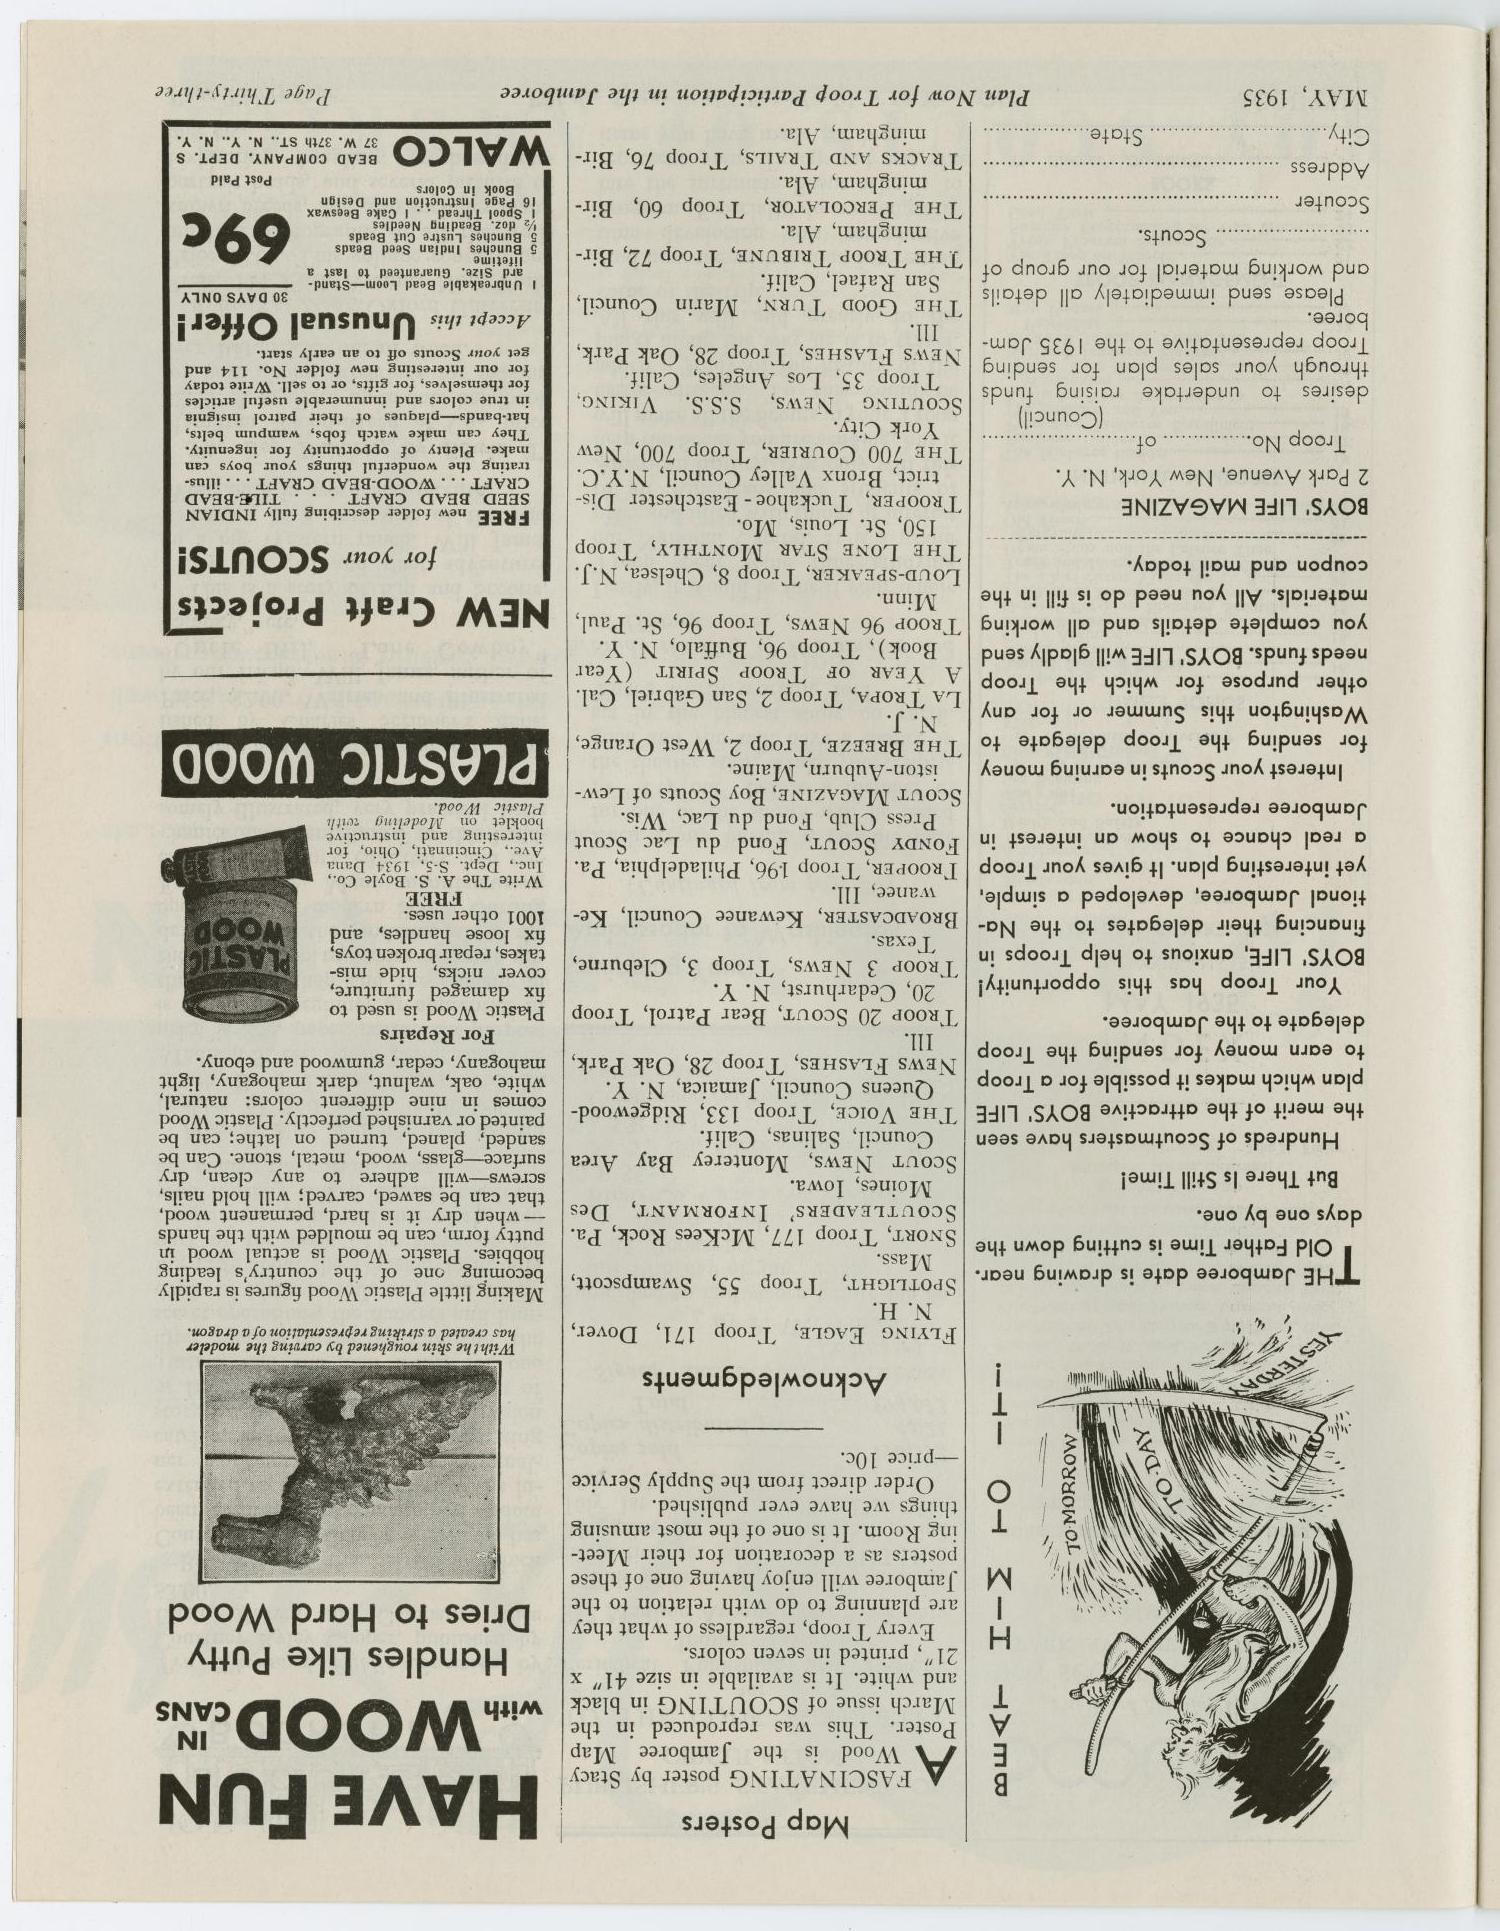 Scouting, Volume 23, Number 5, May 1935
                                                
                                                    33
                                                